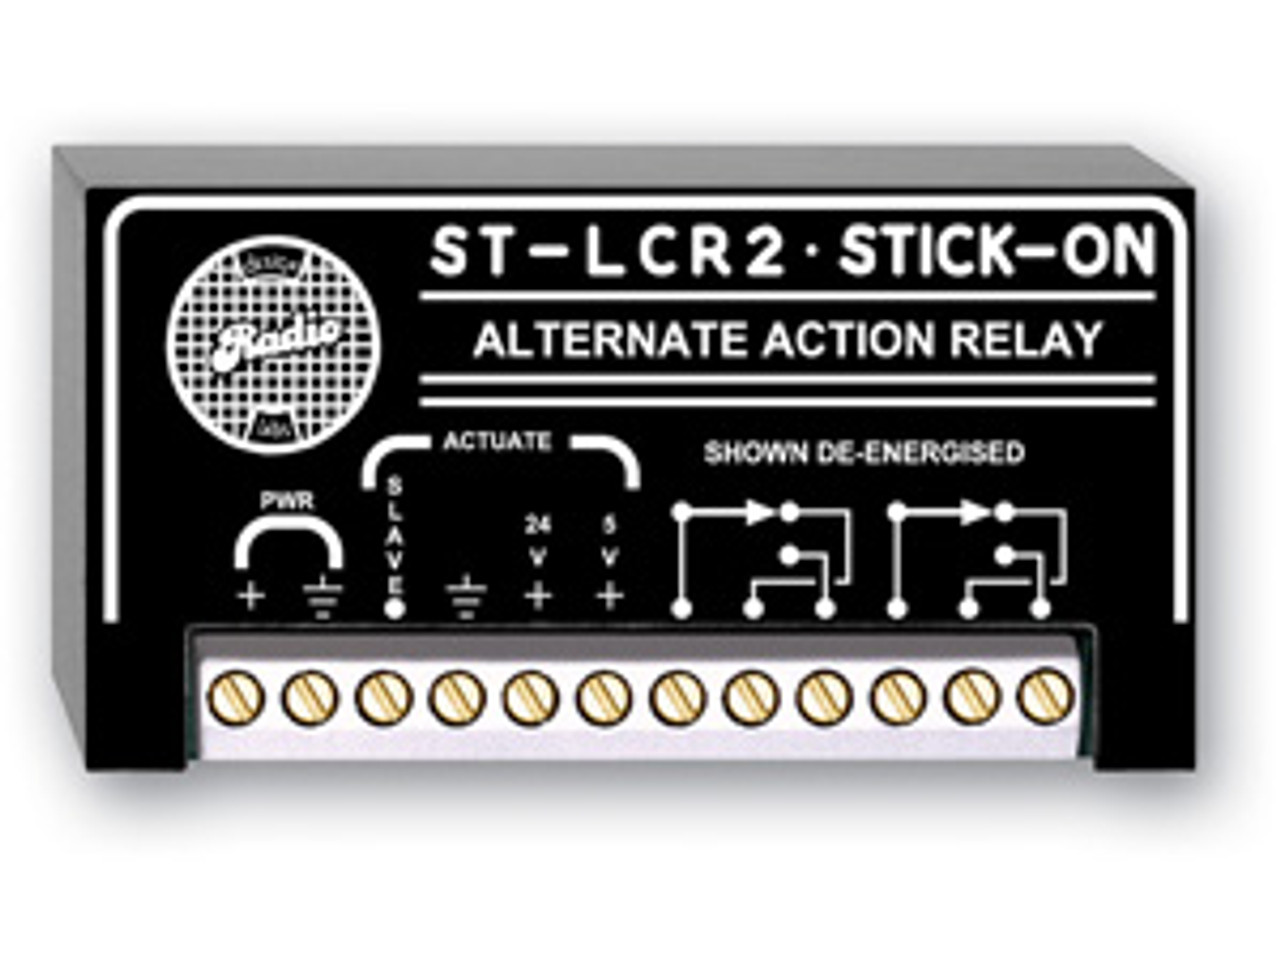 RDL ST-LCR2 Logic Controlled Relay - Latching (ST-LCR2)